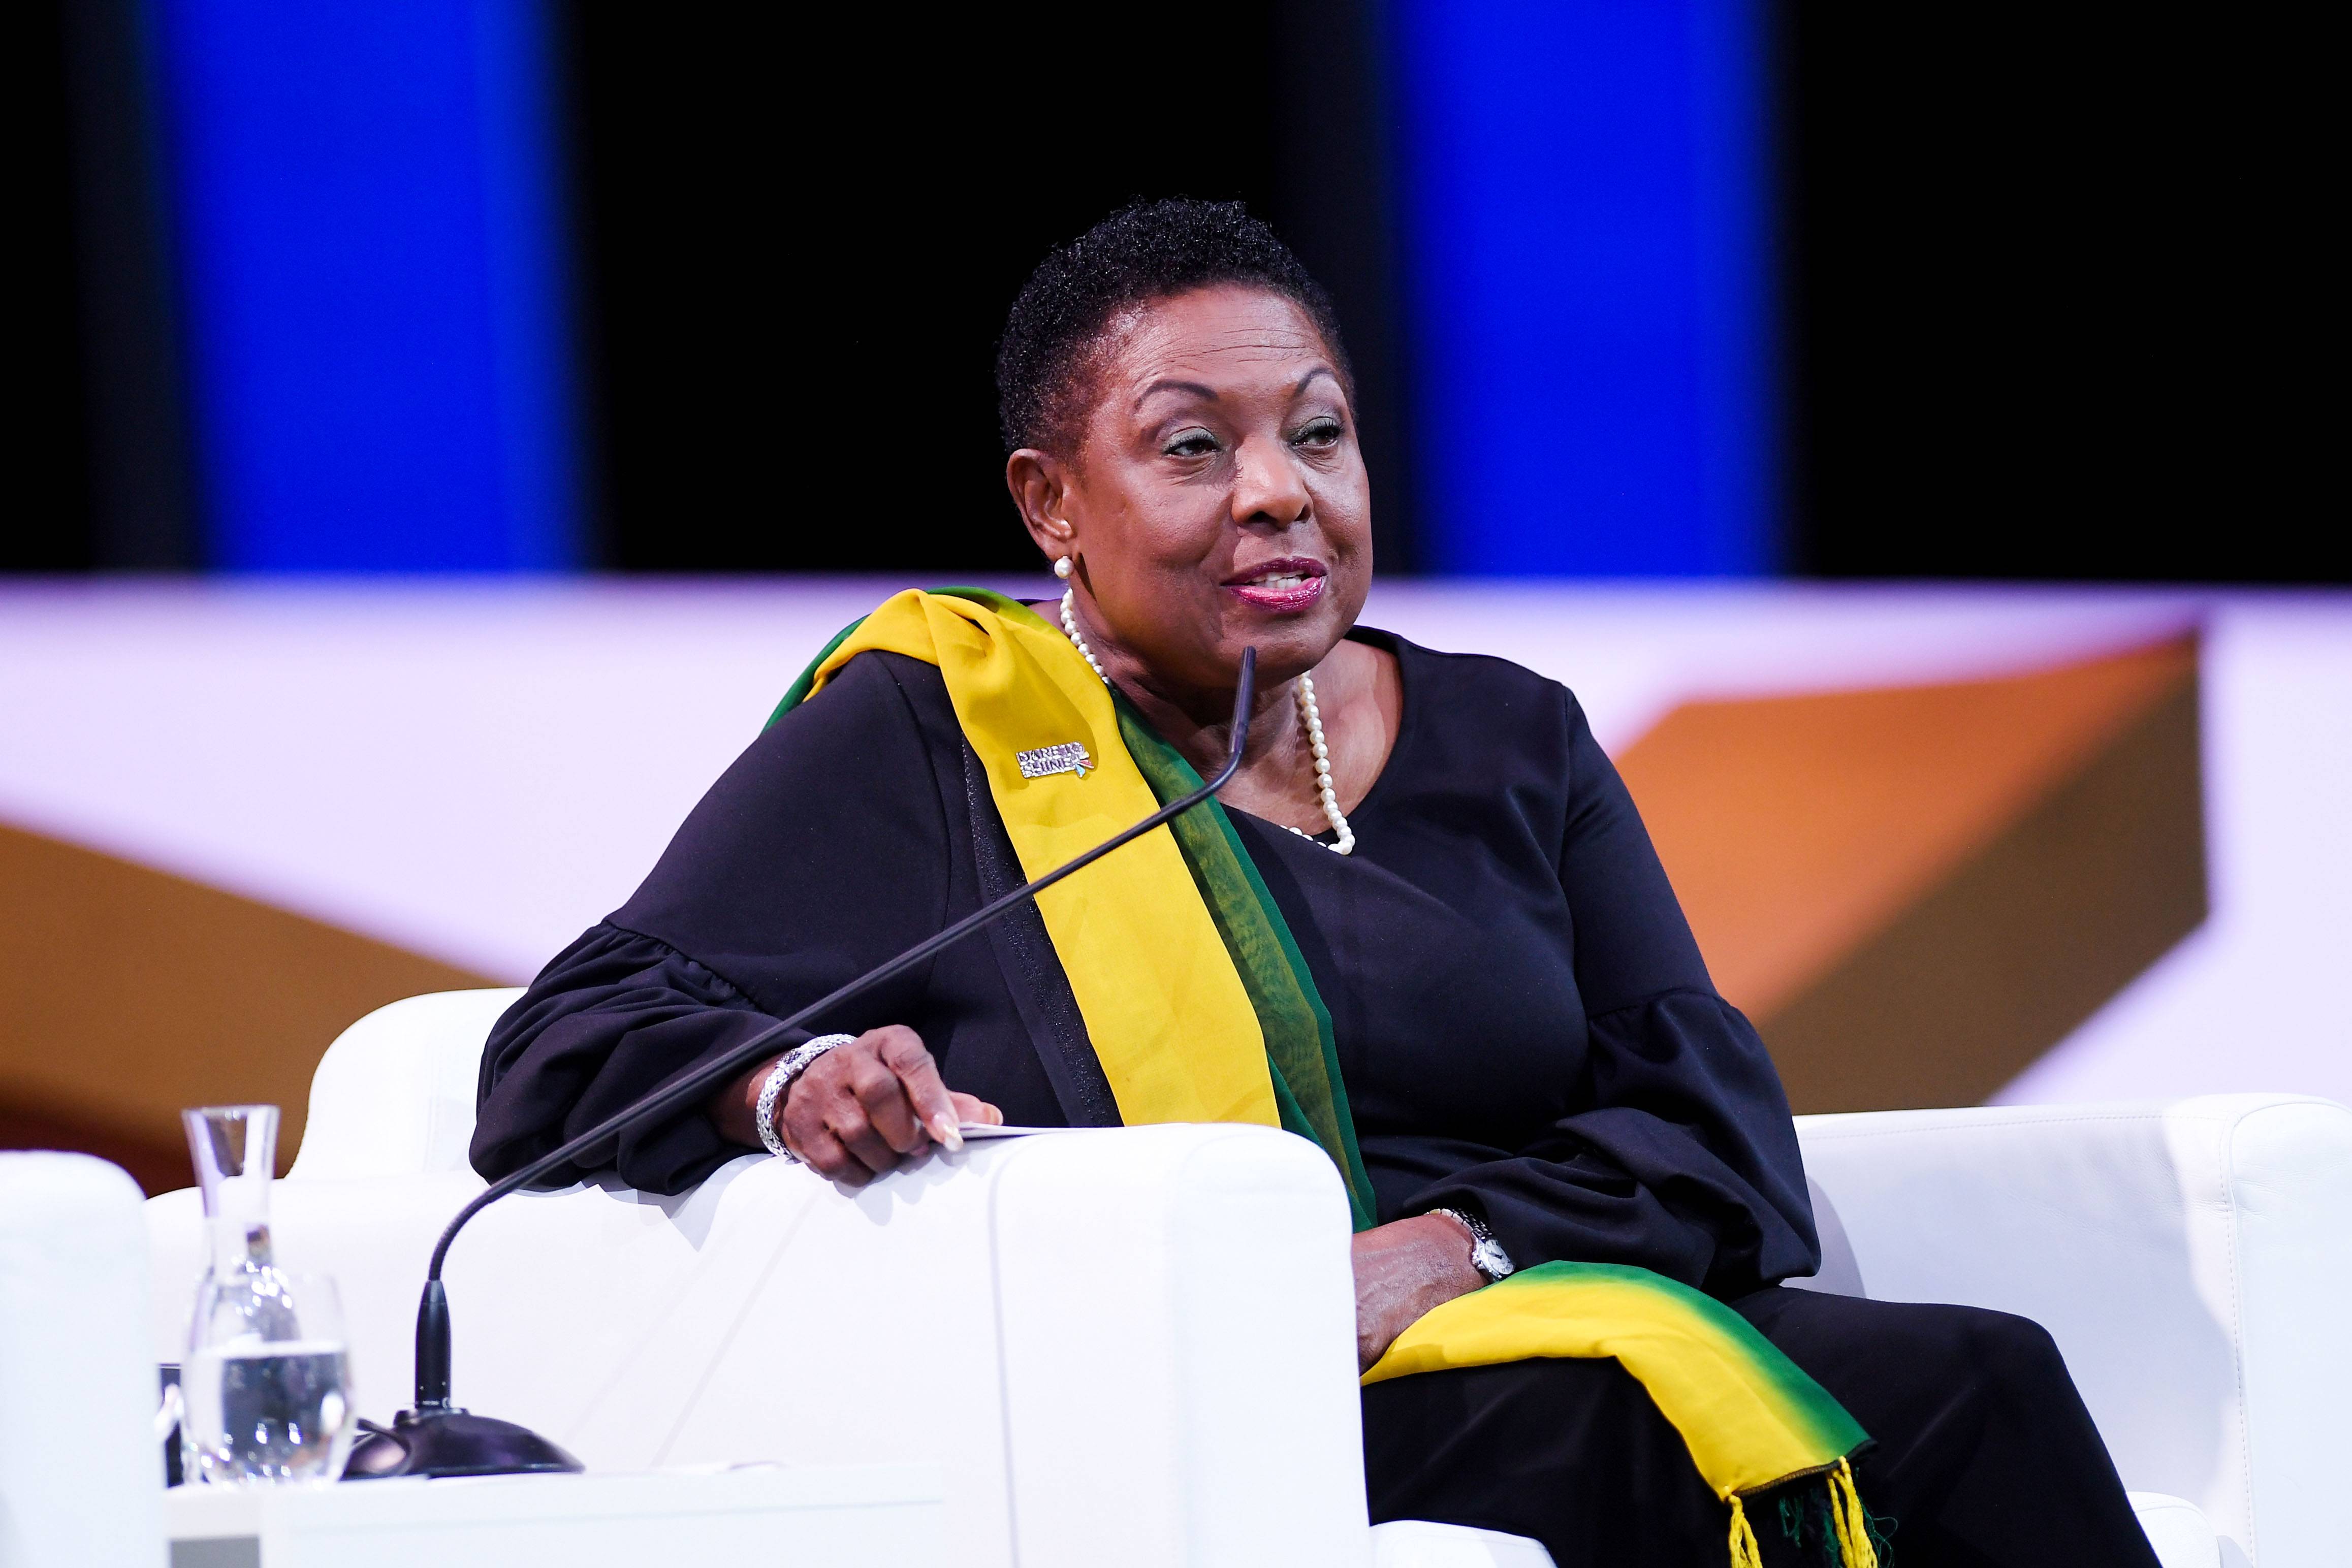 PARIS, FRANCE - JUNE 07: The Honourable Olivia Babsy Grange, CD, MP, Minister of Culture, Gender, Entertainment and Sport, Jamaica talks during the FIFA Women's Football Convention at Paris Expo Porte de Versailles on June 07, 2019 in Paris, France. (Photo by Mike Hewitt - FIFA/FIFA via Getty Images)